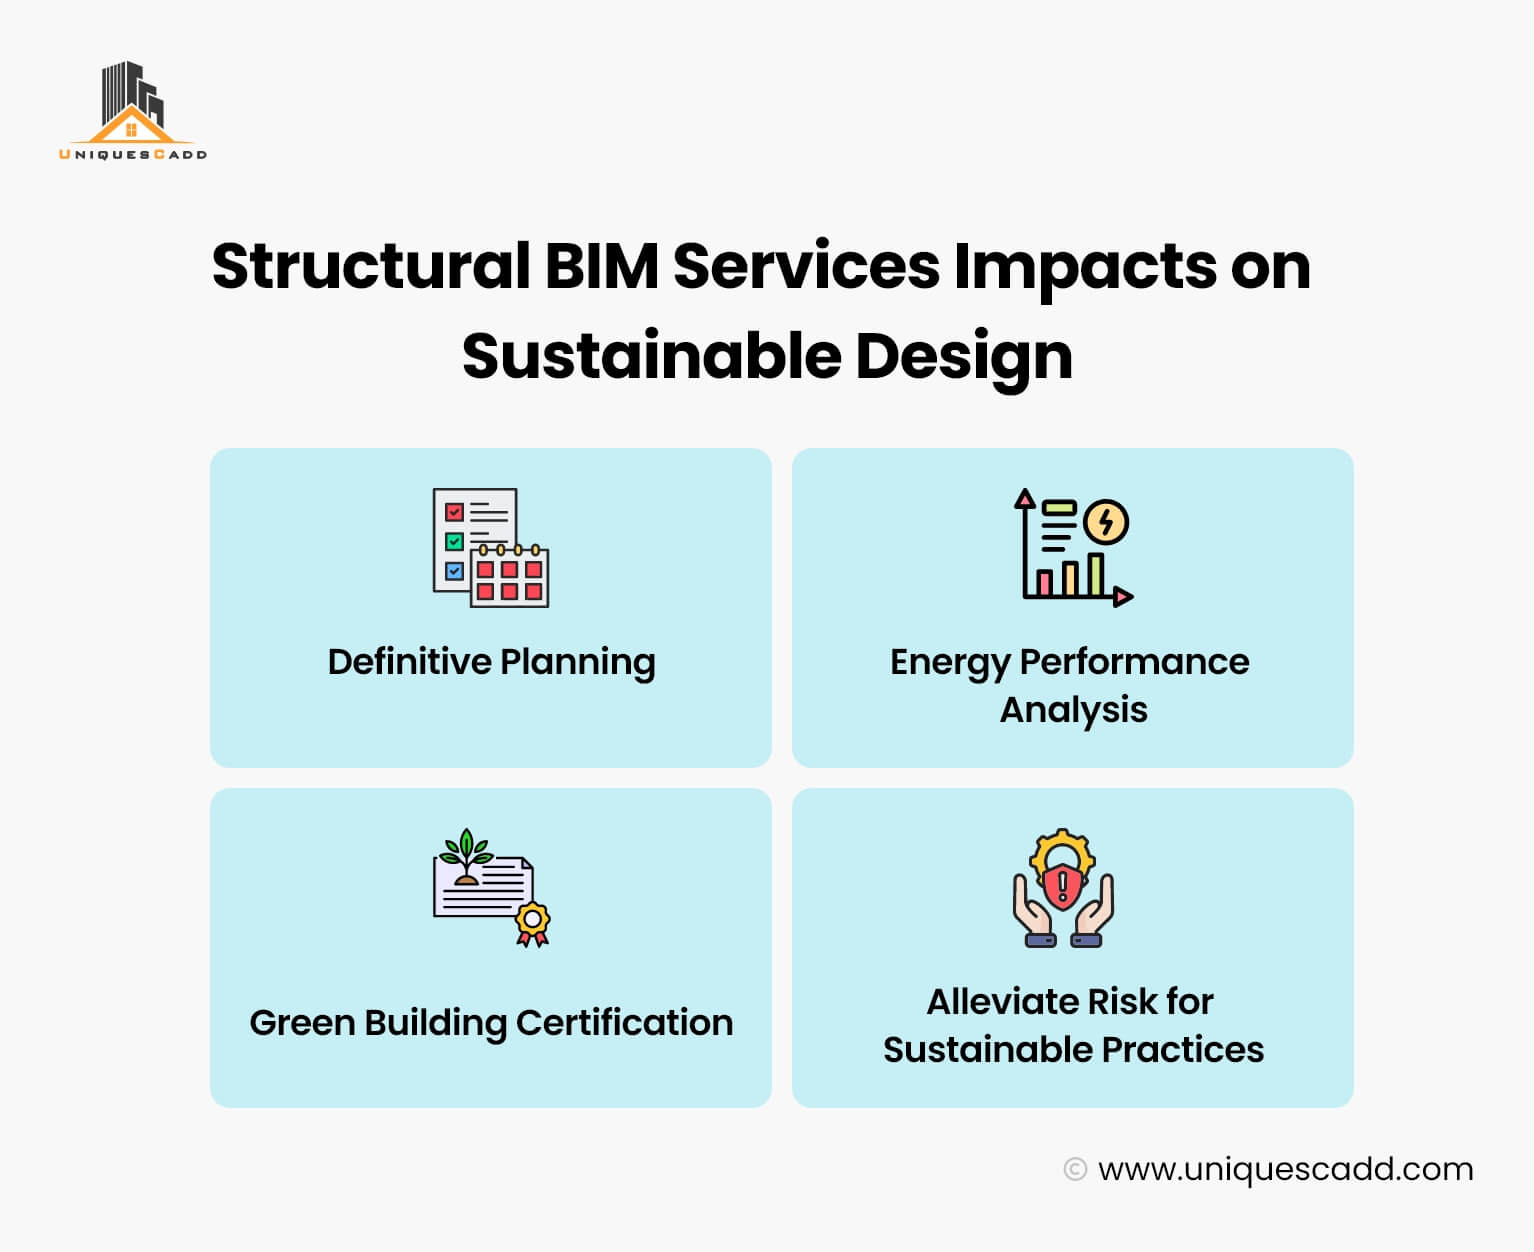 Structural BIM Services Impacts on Sustainable Design